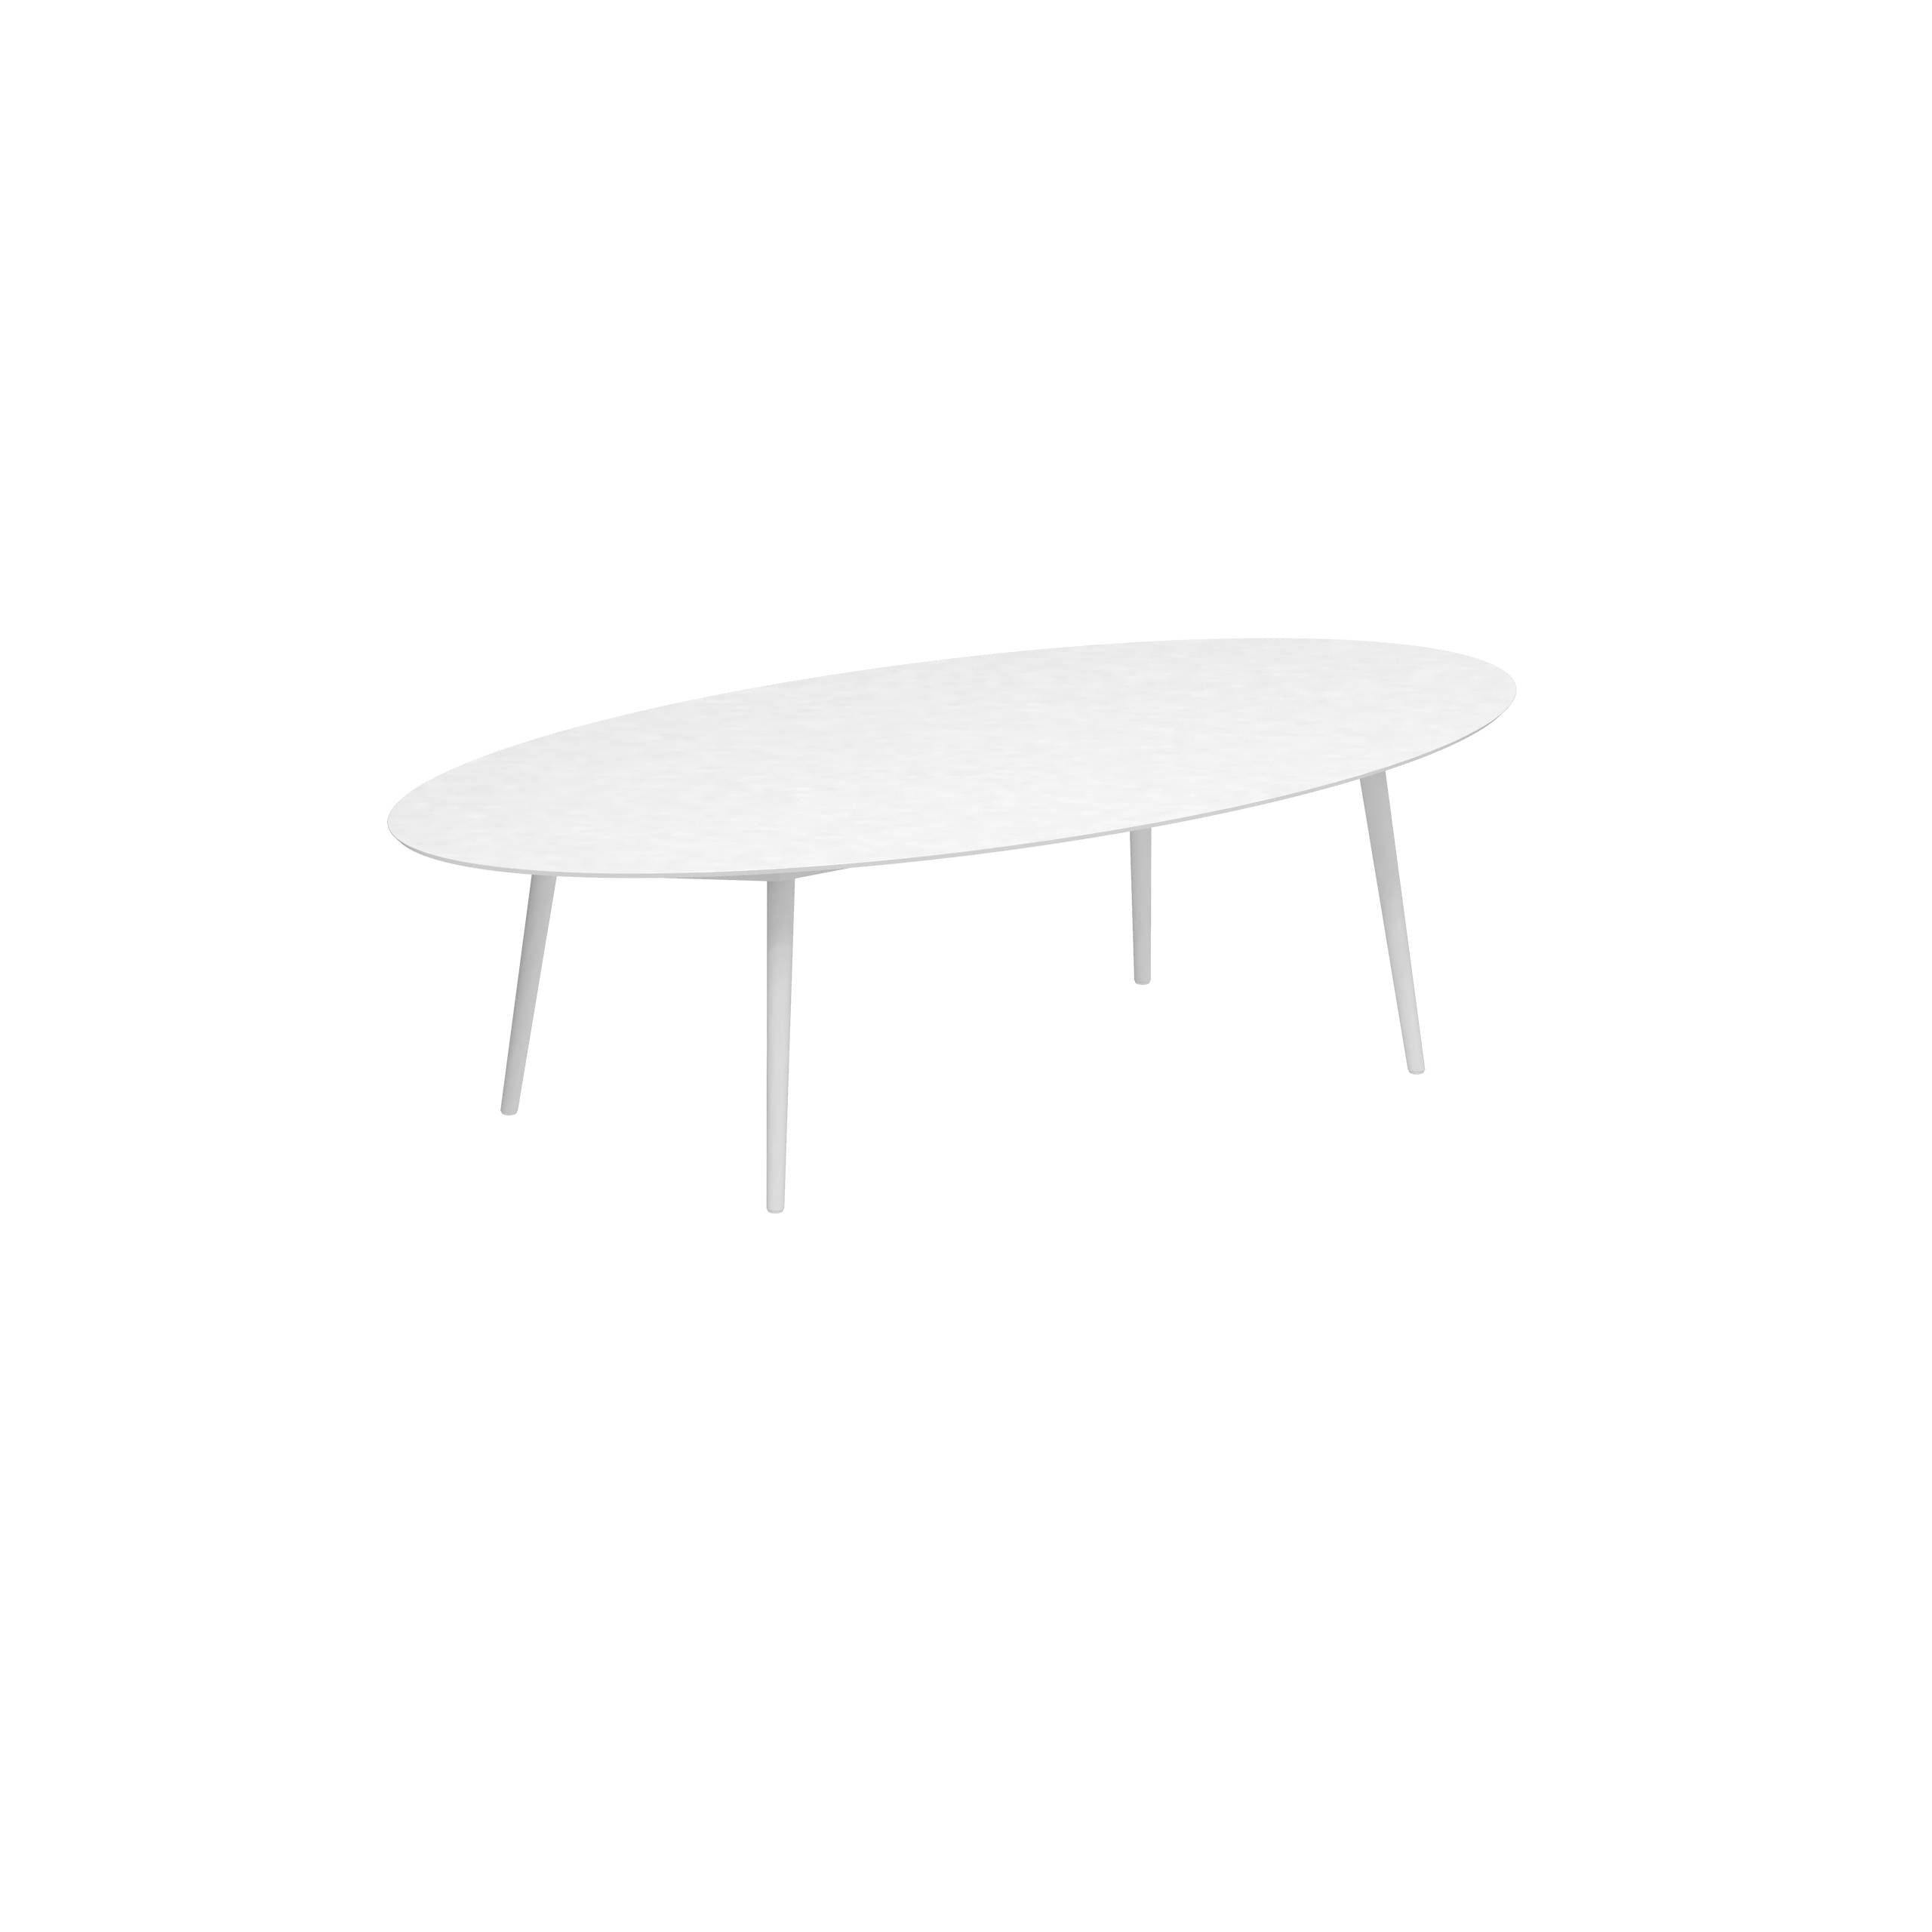 Styletto Low Dining Table 250x130cm Alu Legs White Ceramic Tabletop White